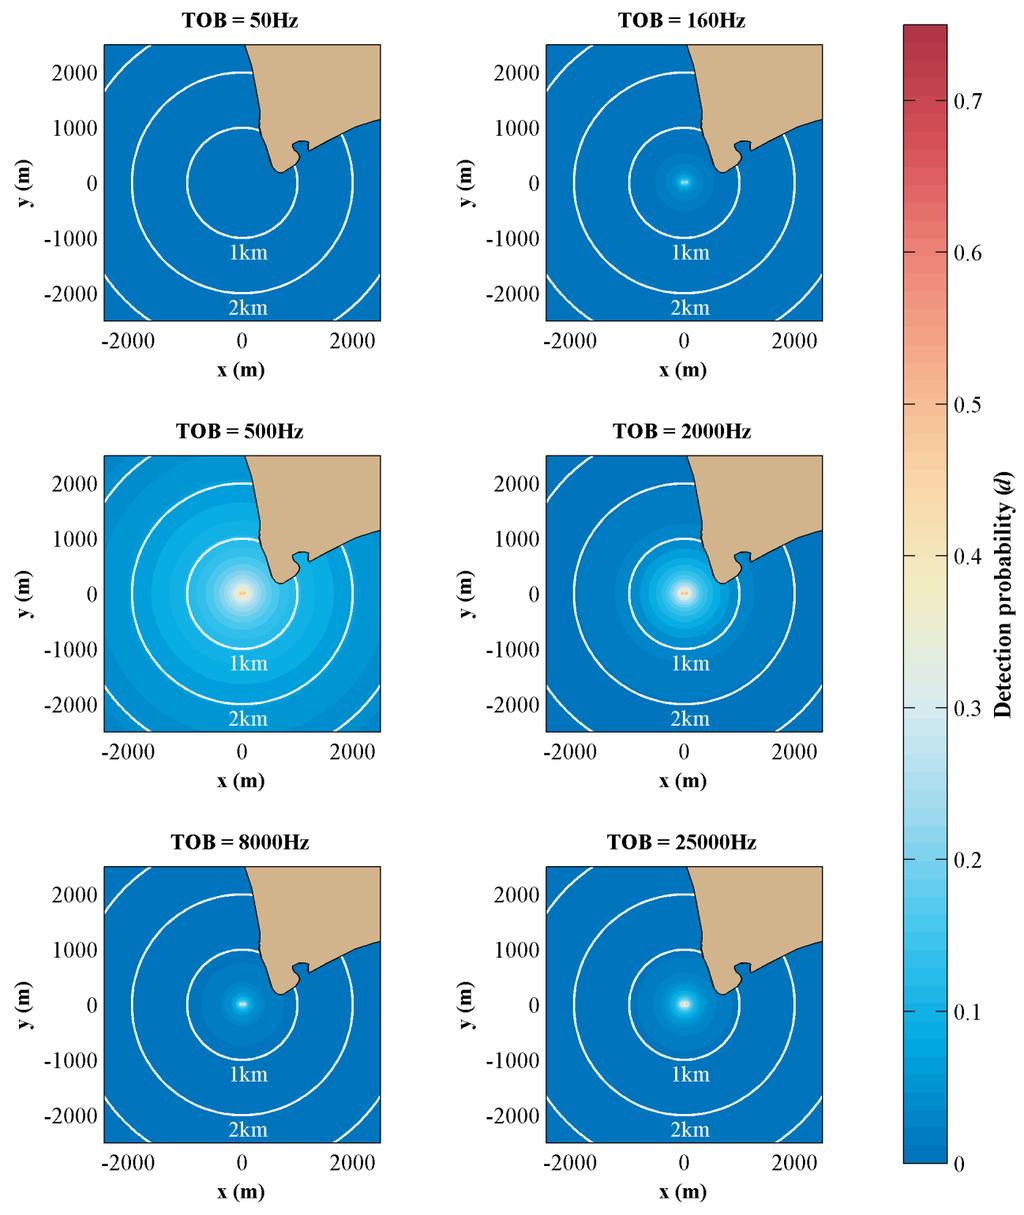 Figure 5 Probability of mid-frequency cetacean (killer whale) detecting turbine noise (30 m depth